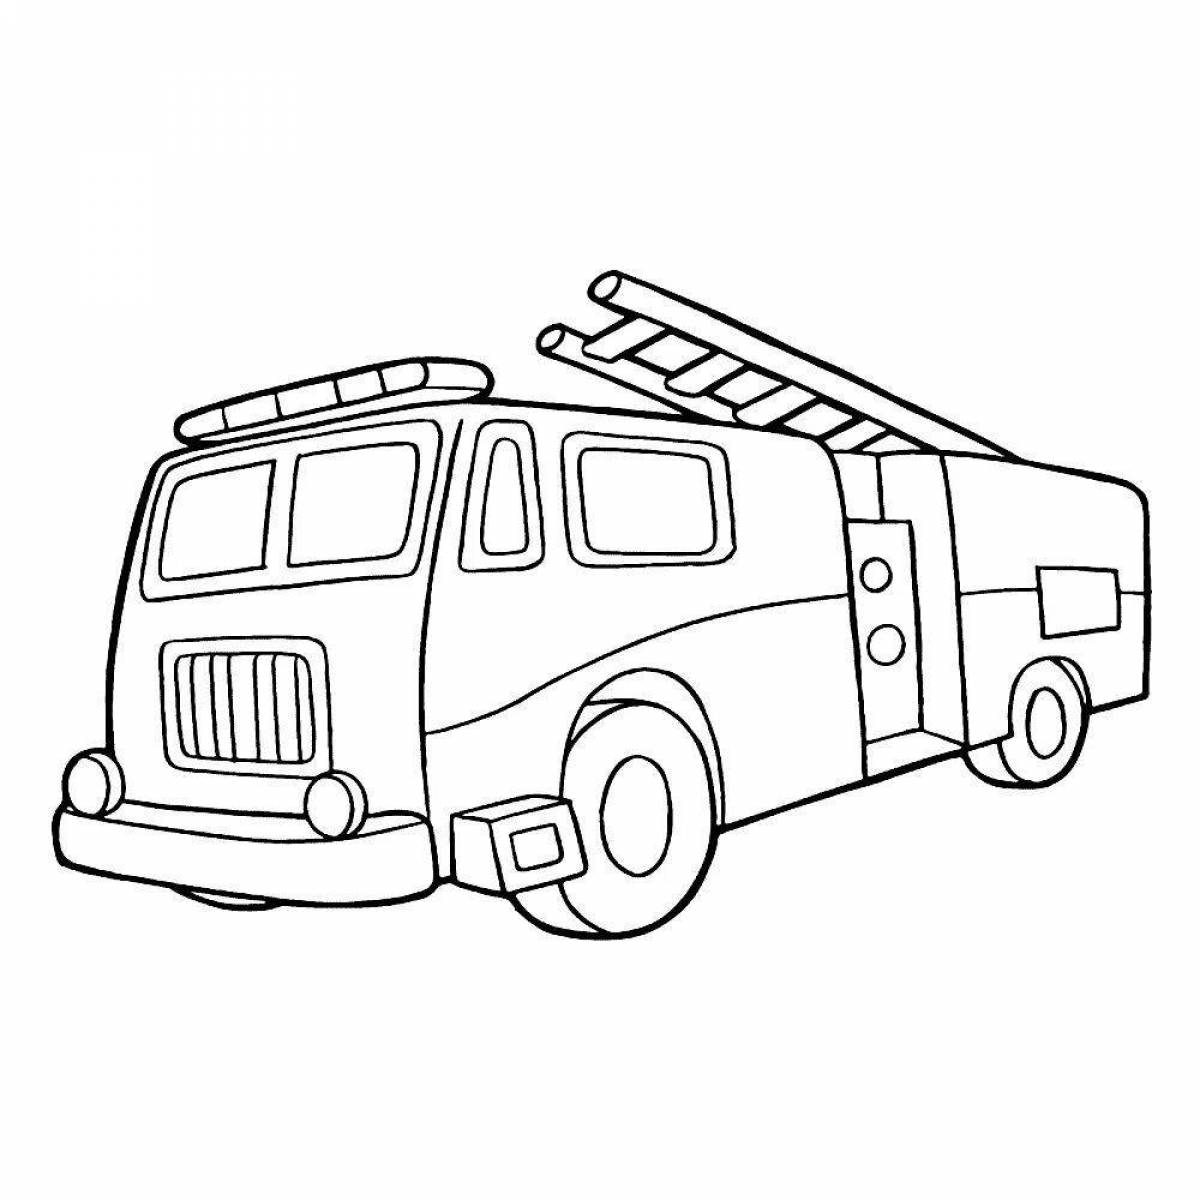 Brilliant fire truck coloring page for students